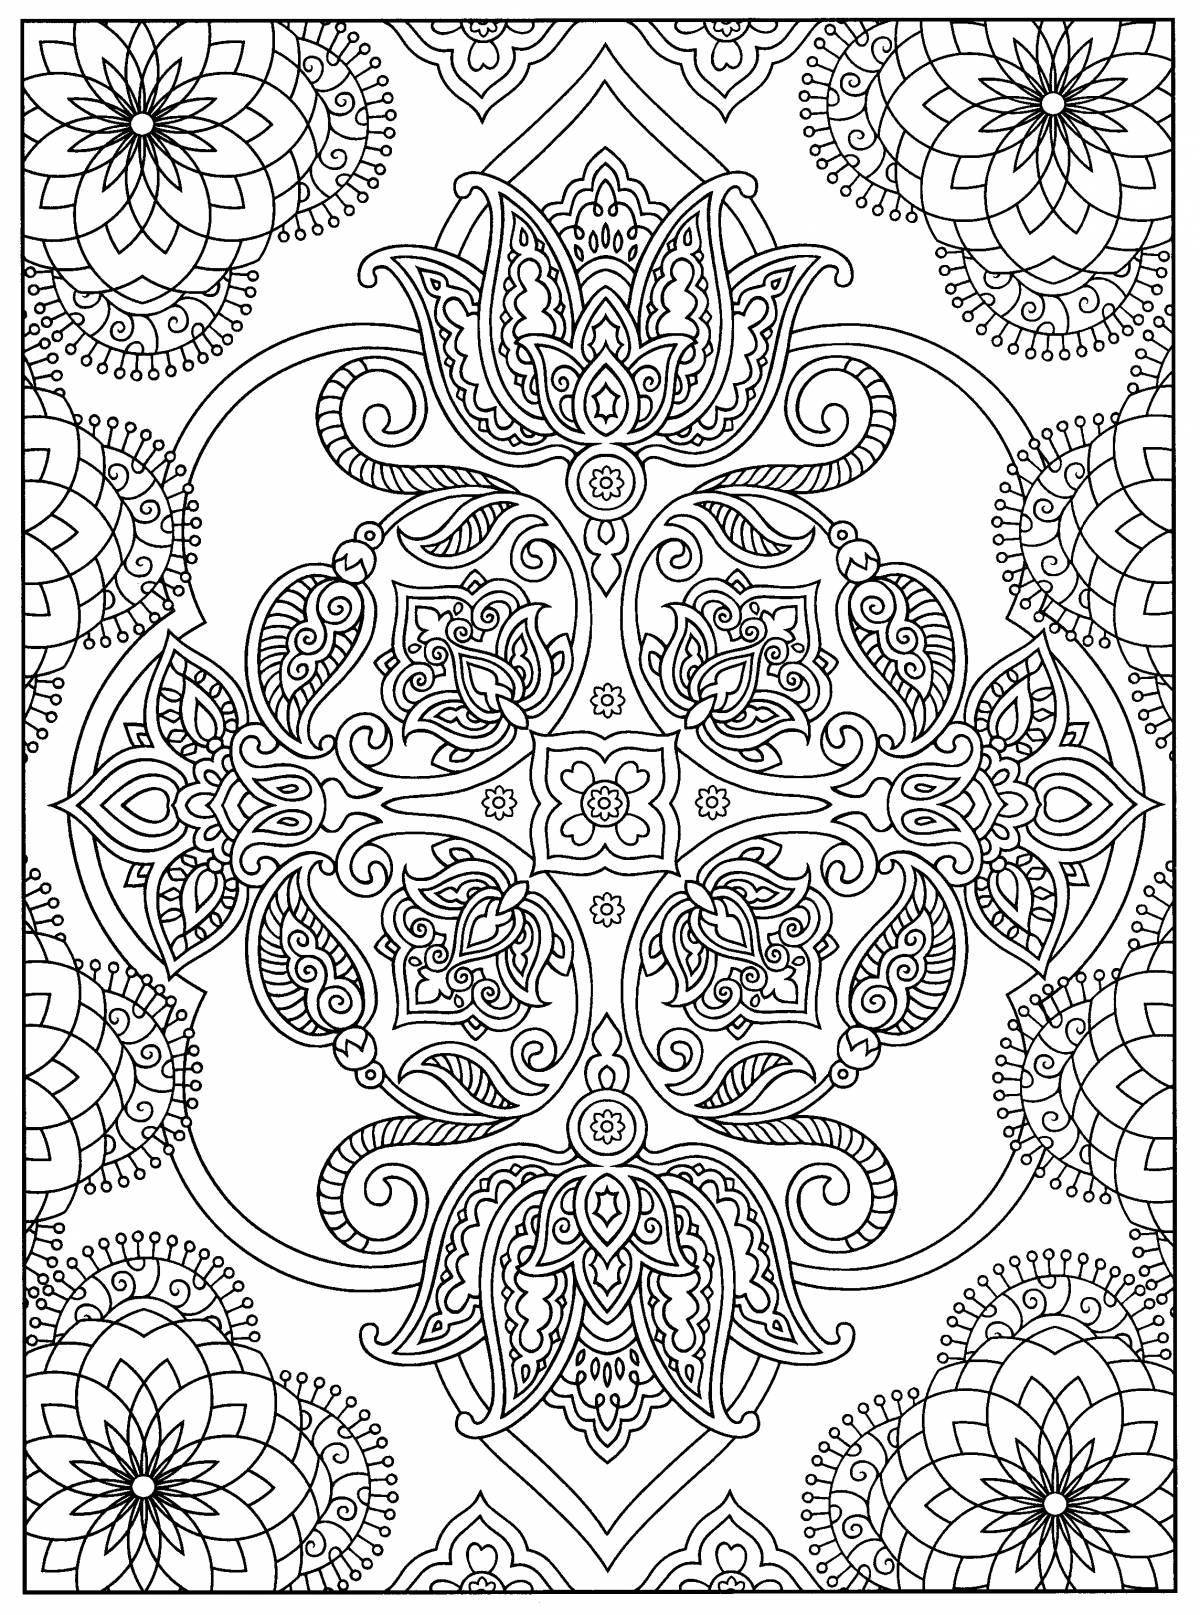 Adorable coloring page ornament